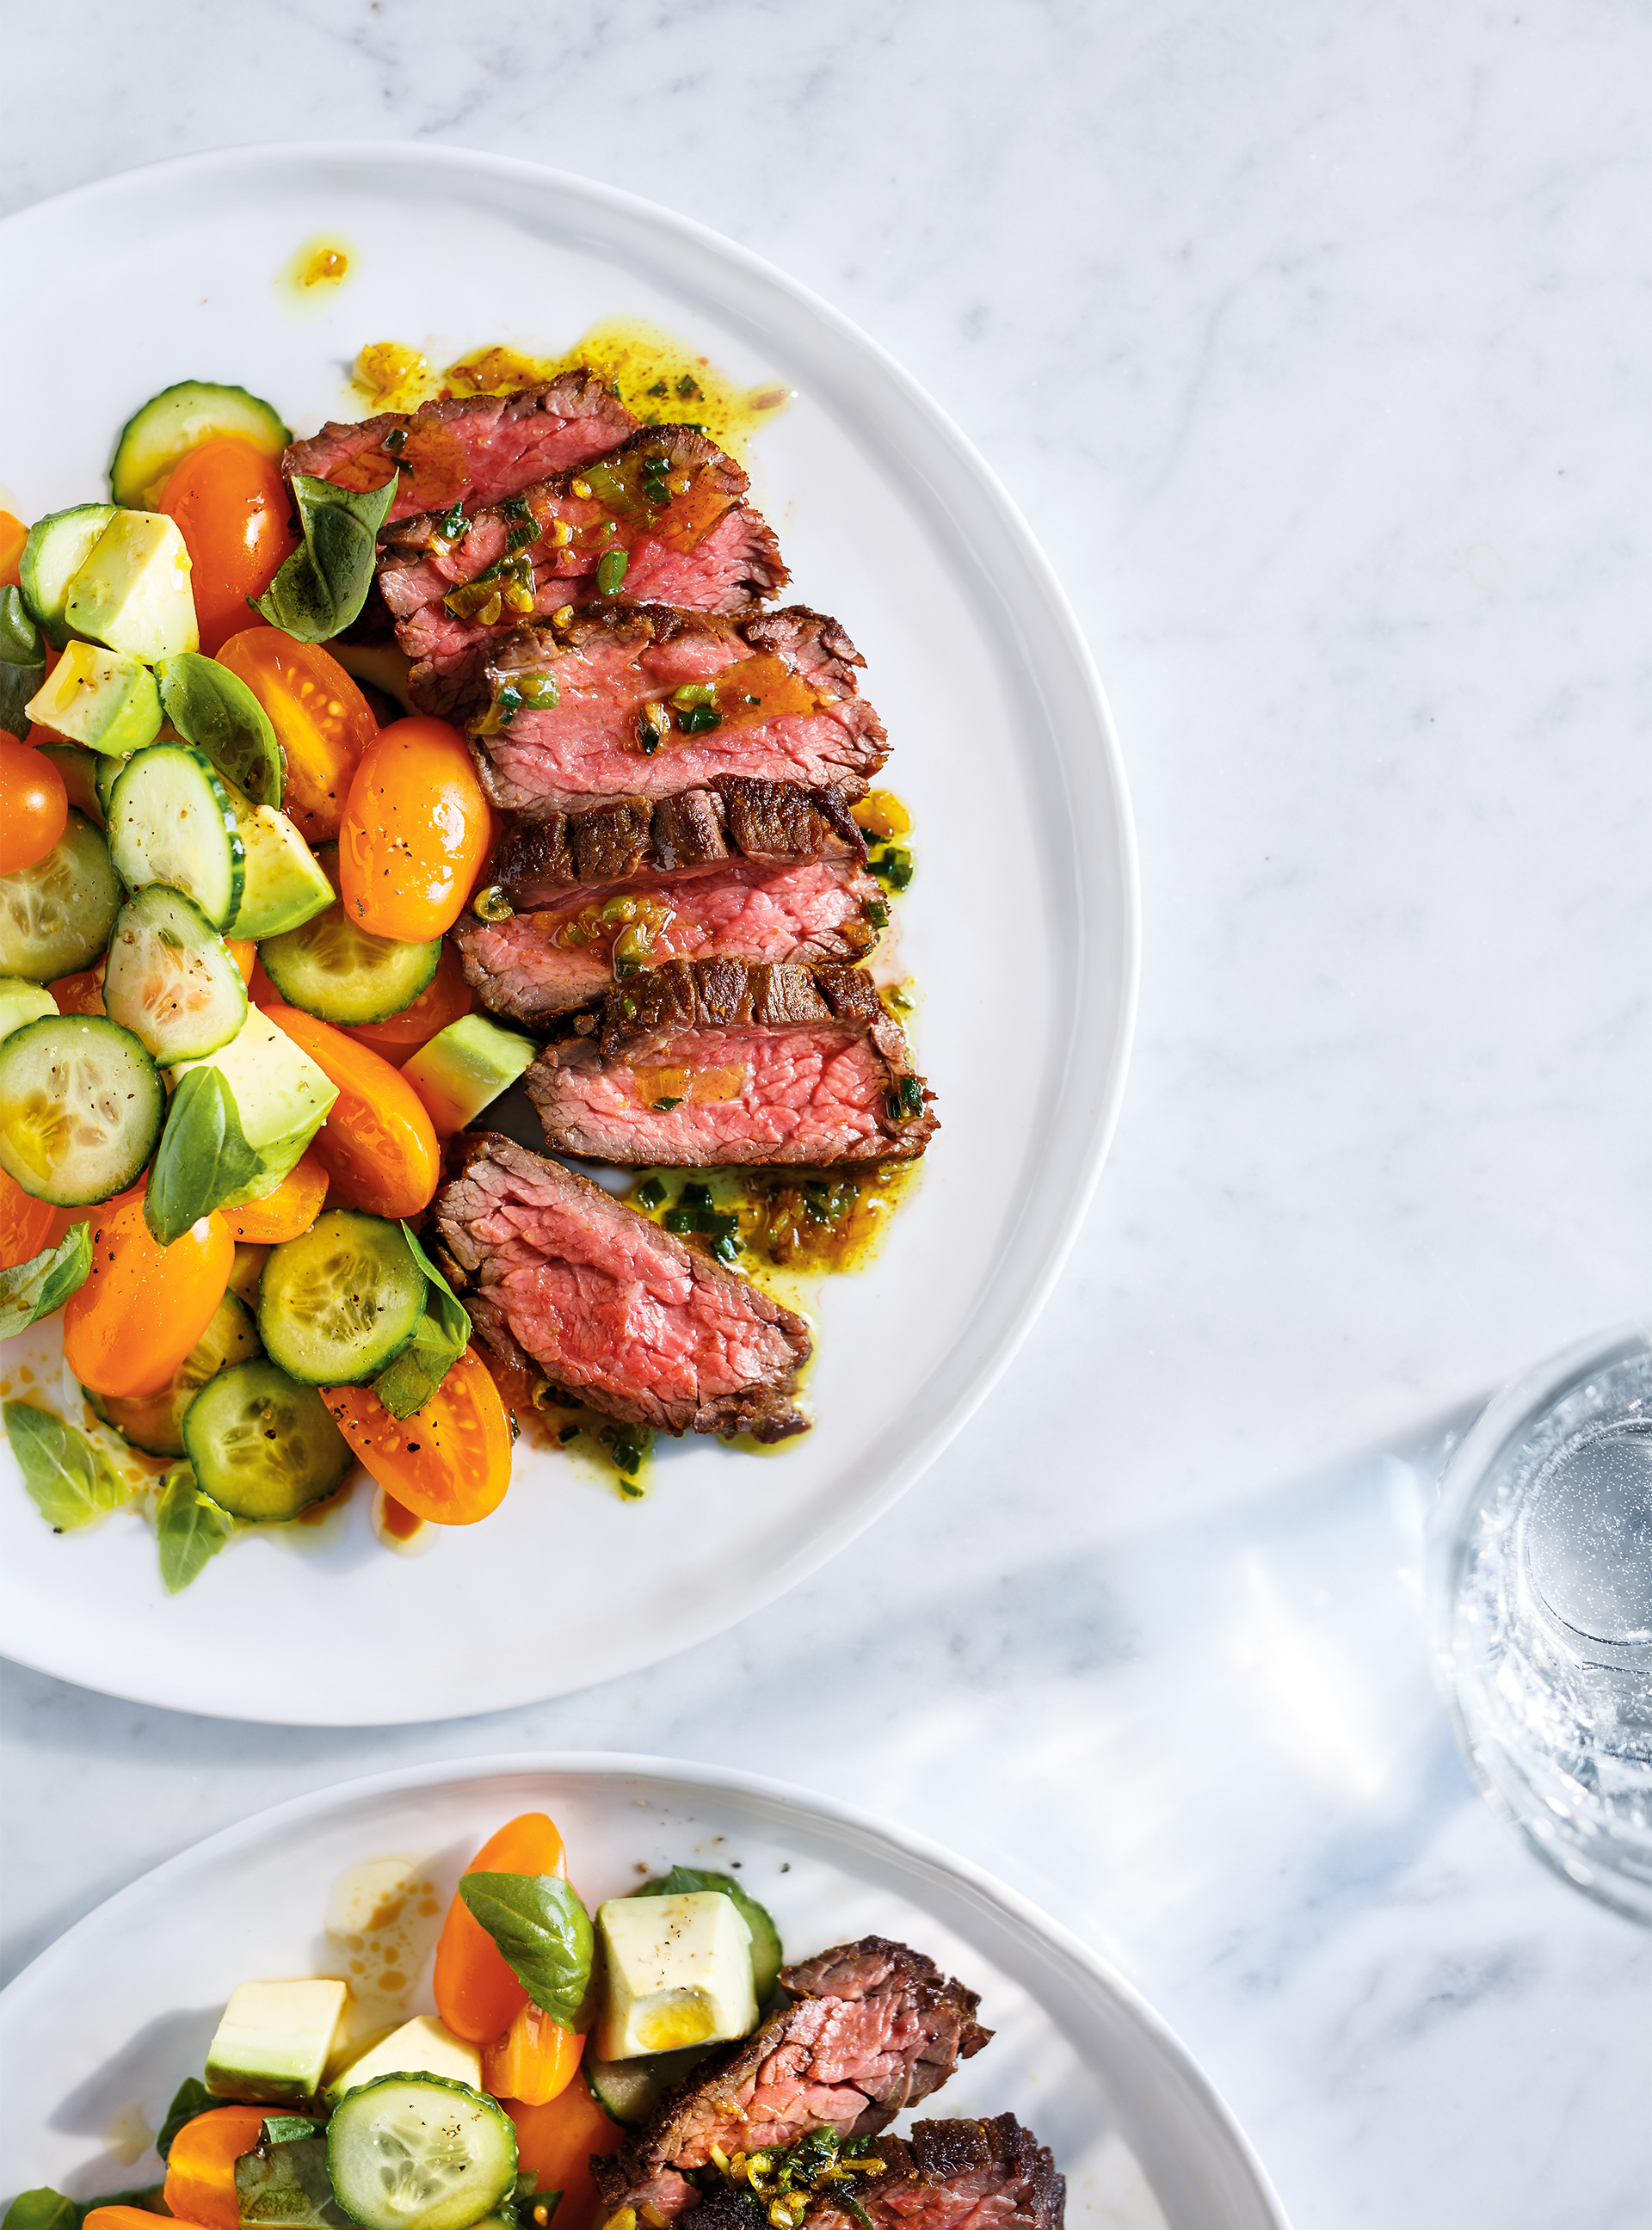 Quick Flap Steak and Tomato and Avocado Salad with Soy Sauce